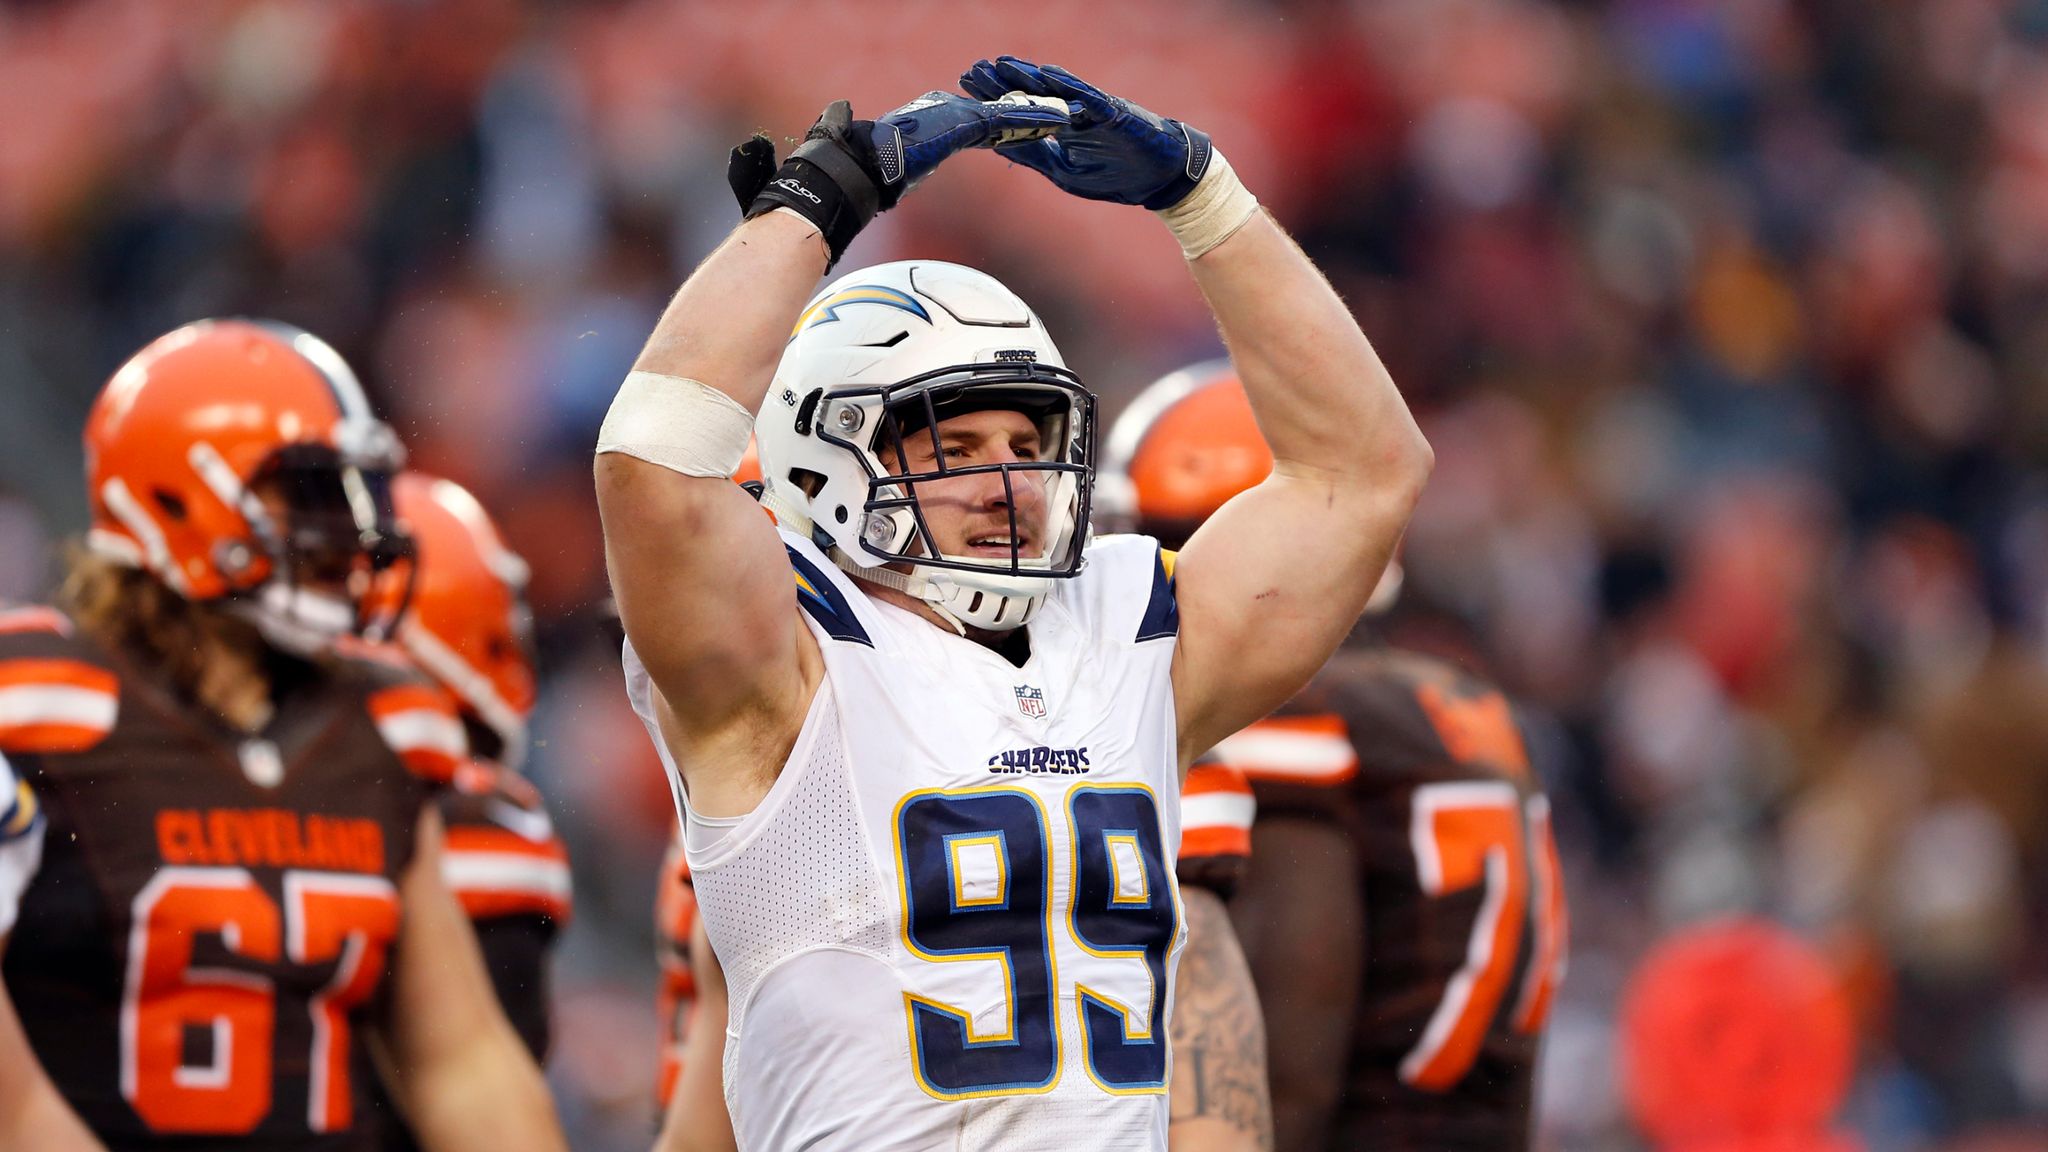 Nick Bosa vs. Joey Bosa contract: Comparing NFL brothers' deals